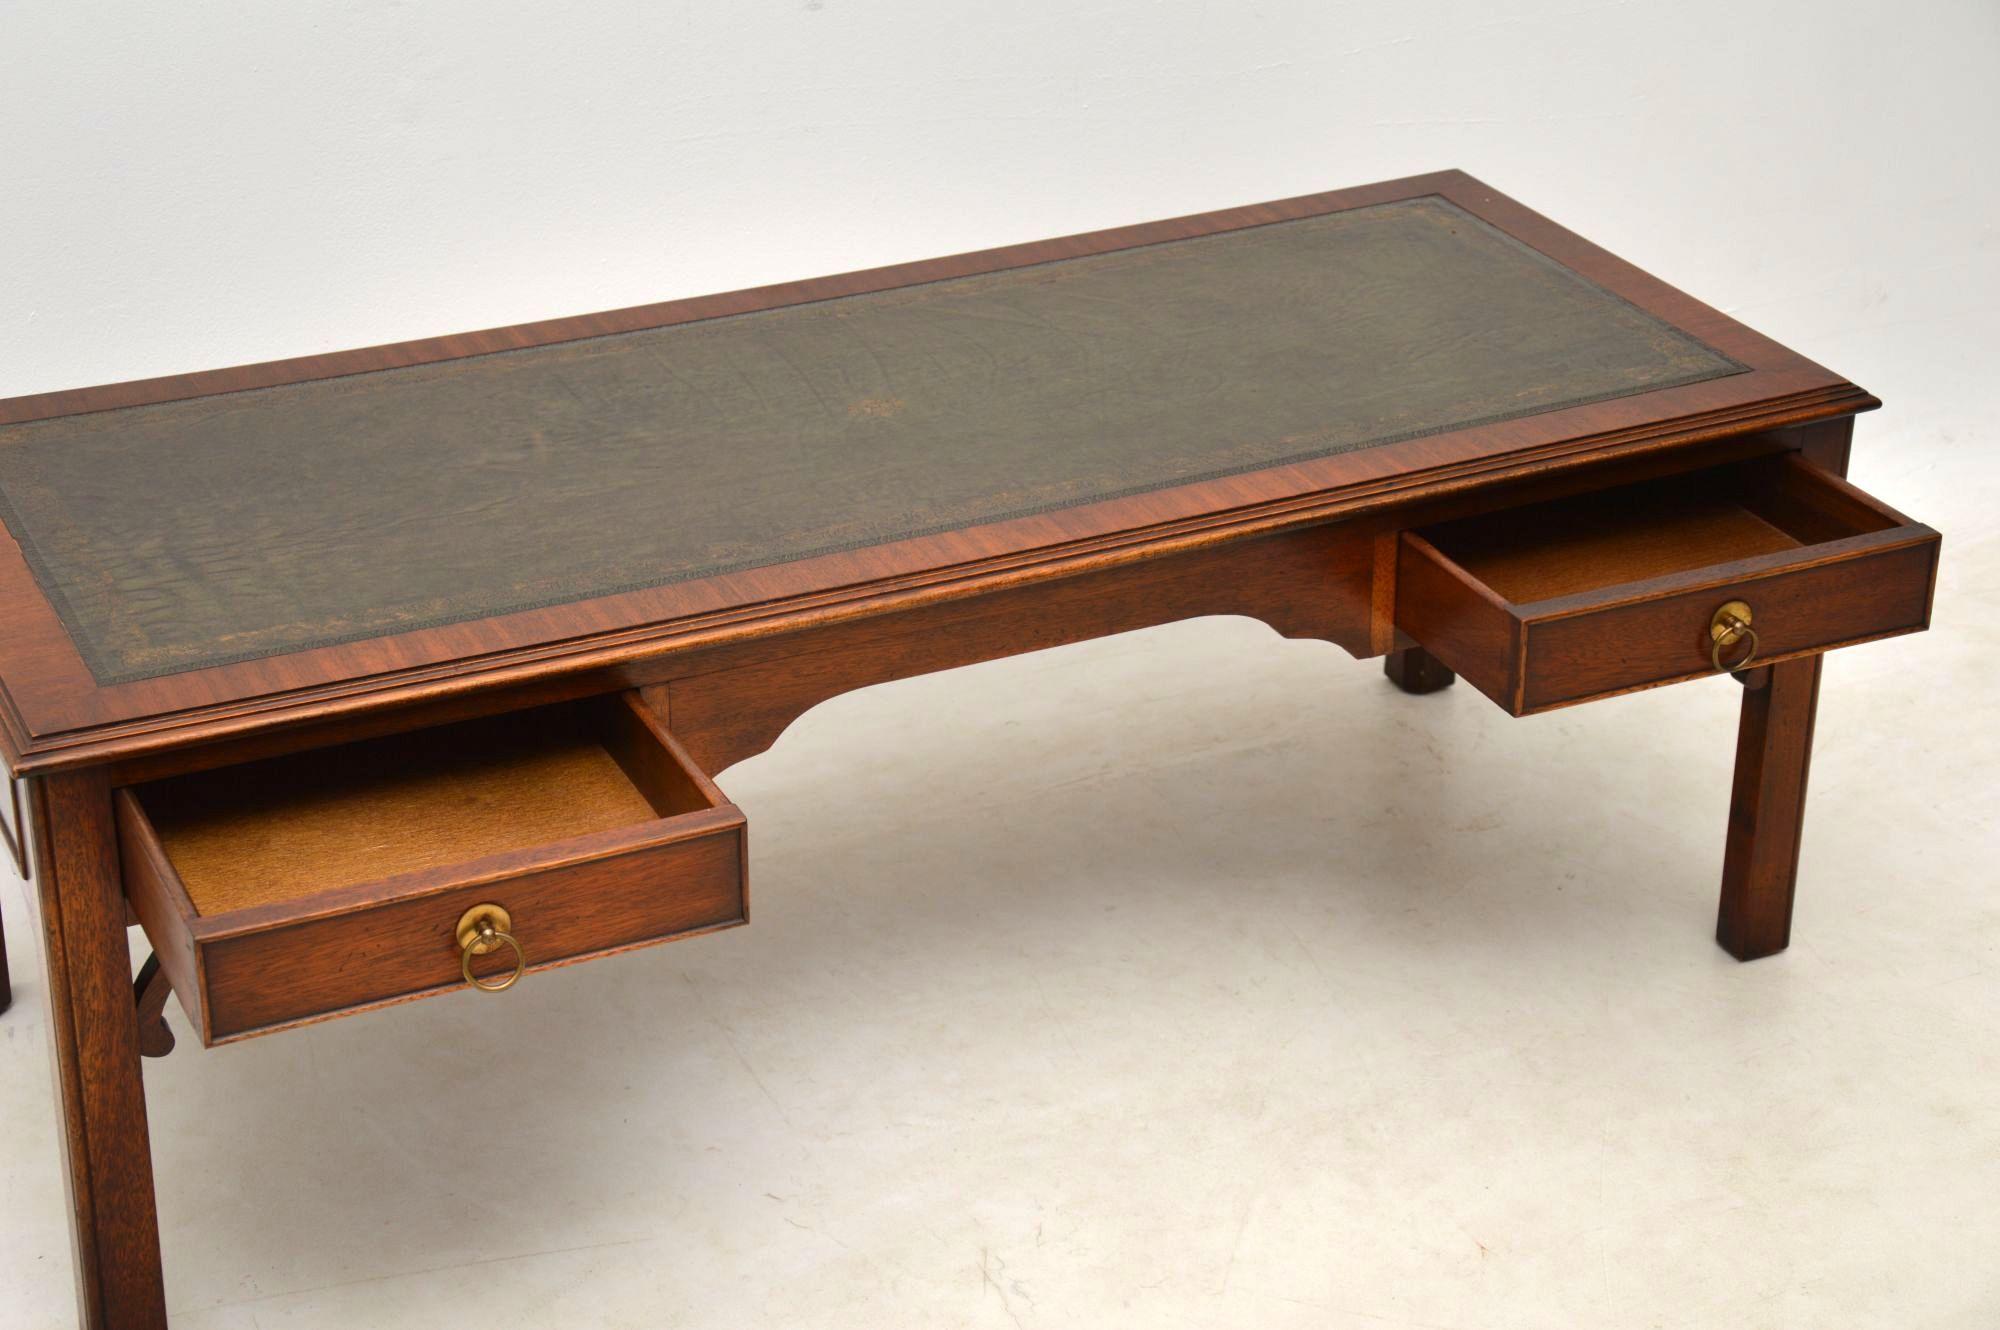 Large Antique Georgian Style Mahogany Leather Top Coffee Table 1